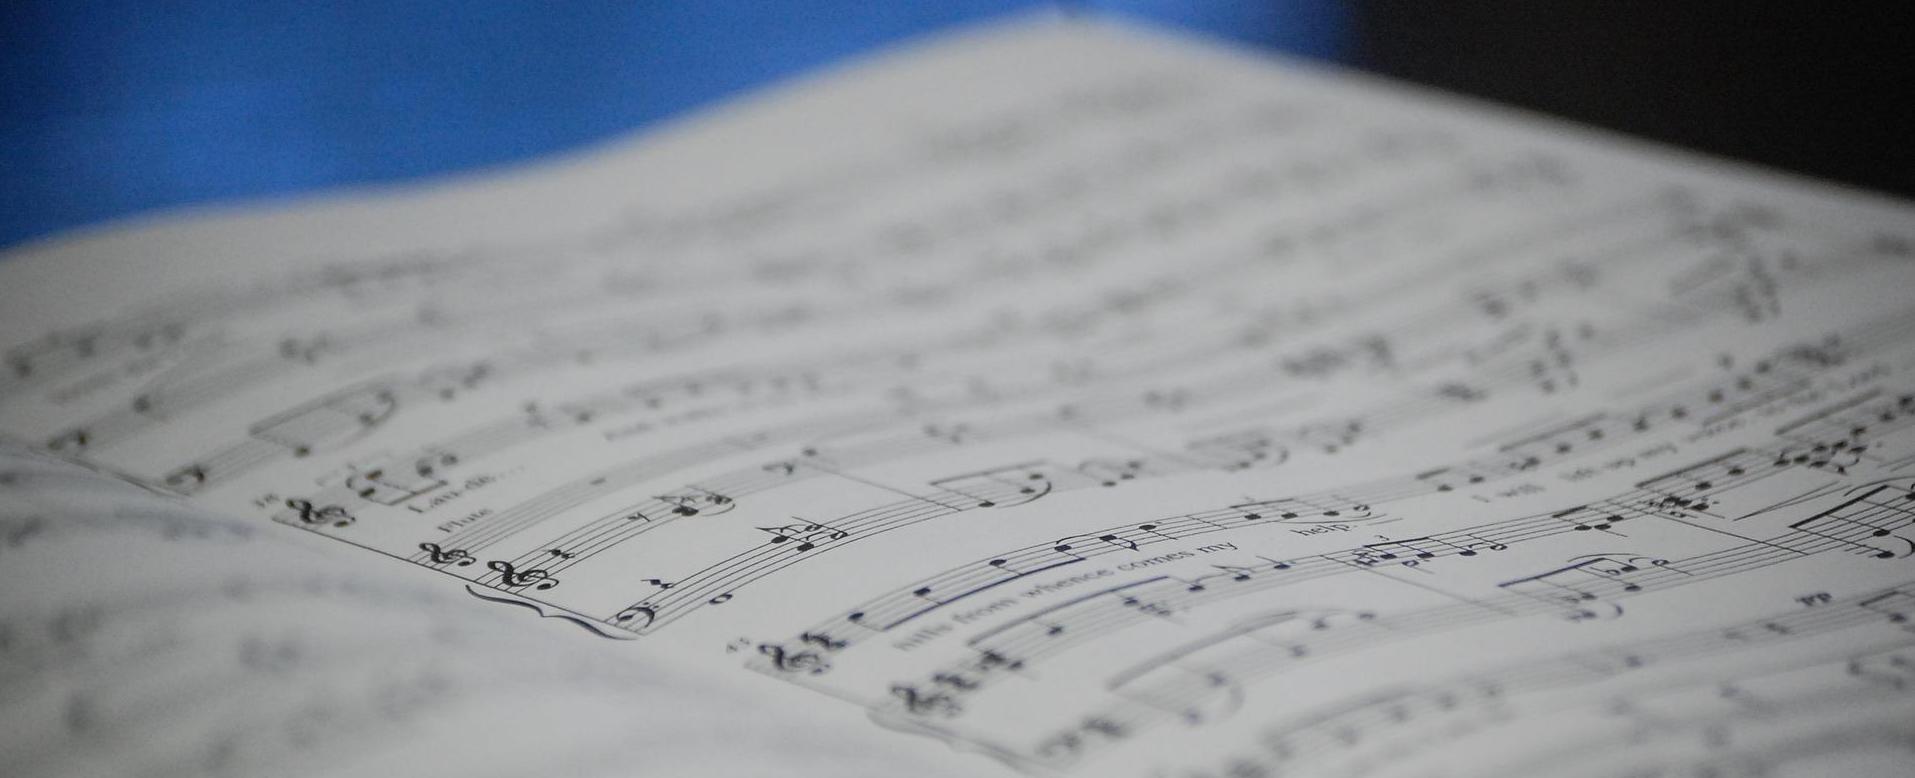 Image of sheet music against a blue background.